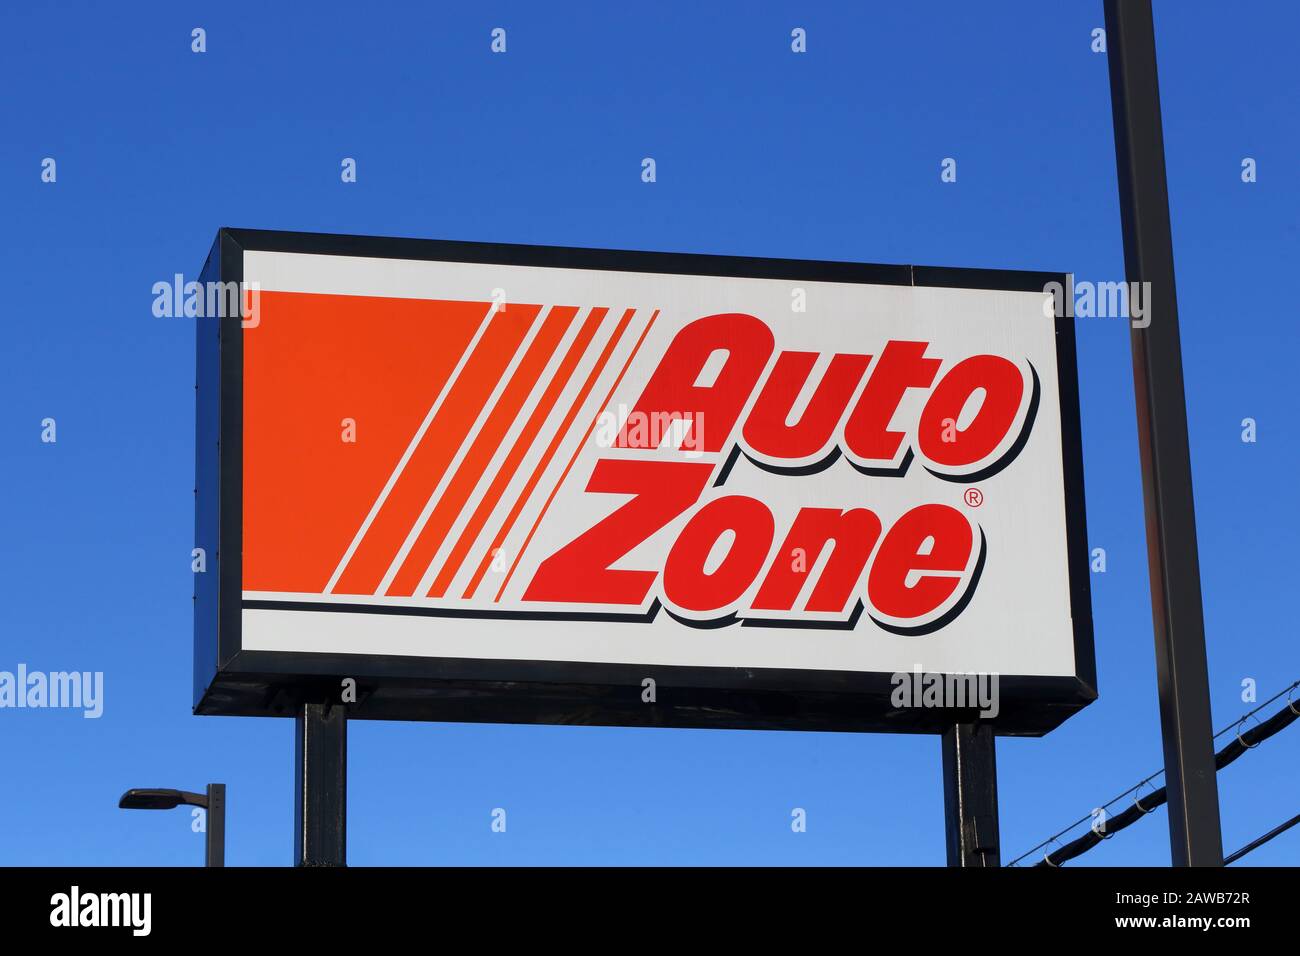 An AutoZone aftermarket car parts retailer sign on a pole against a sunny, blue sky Stock Photo